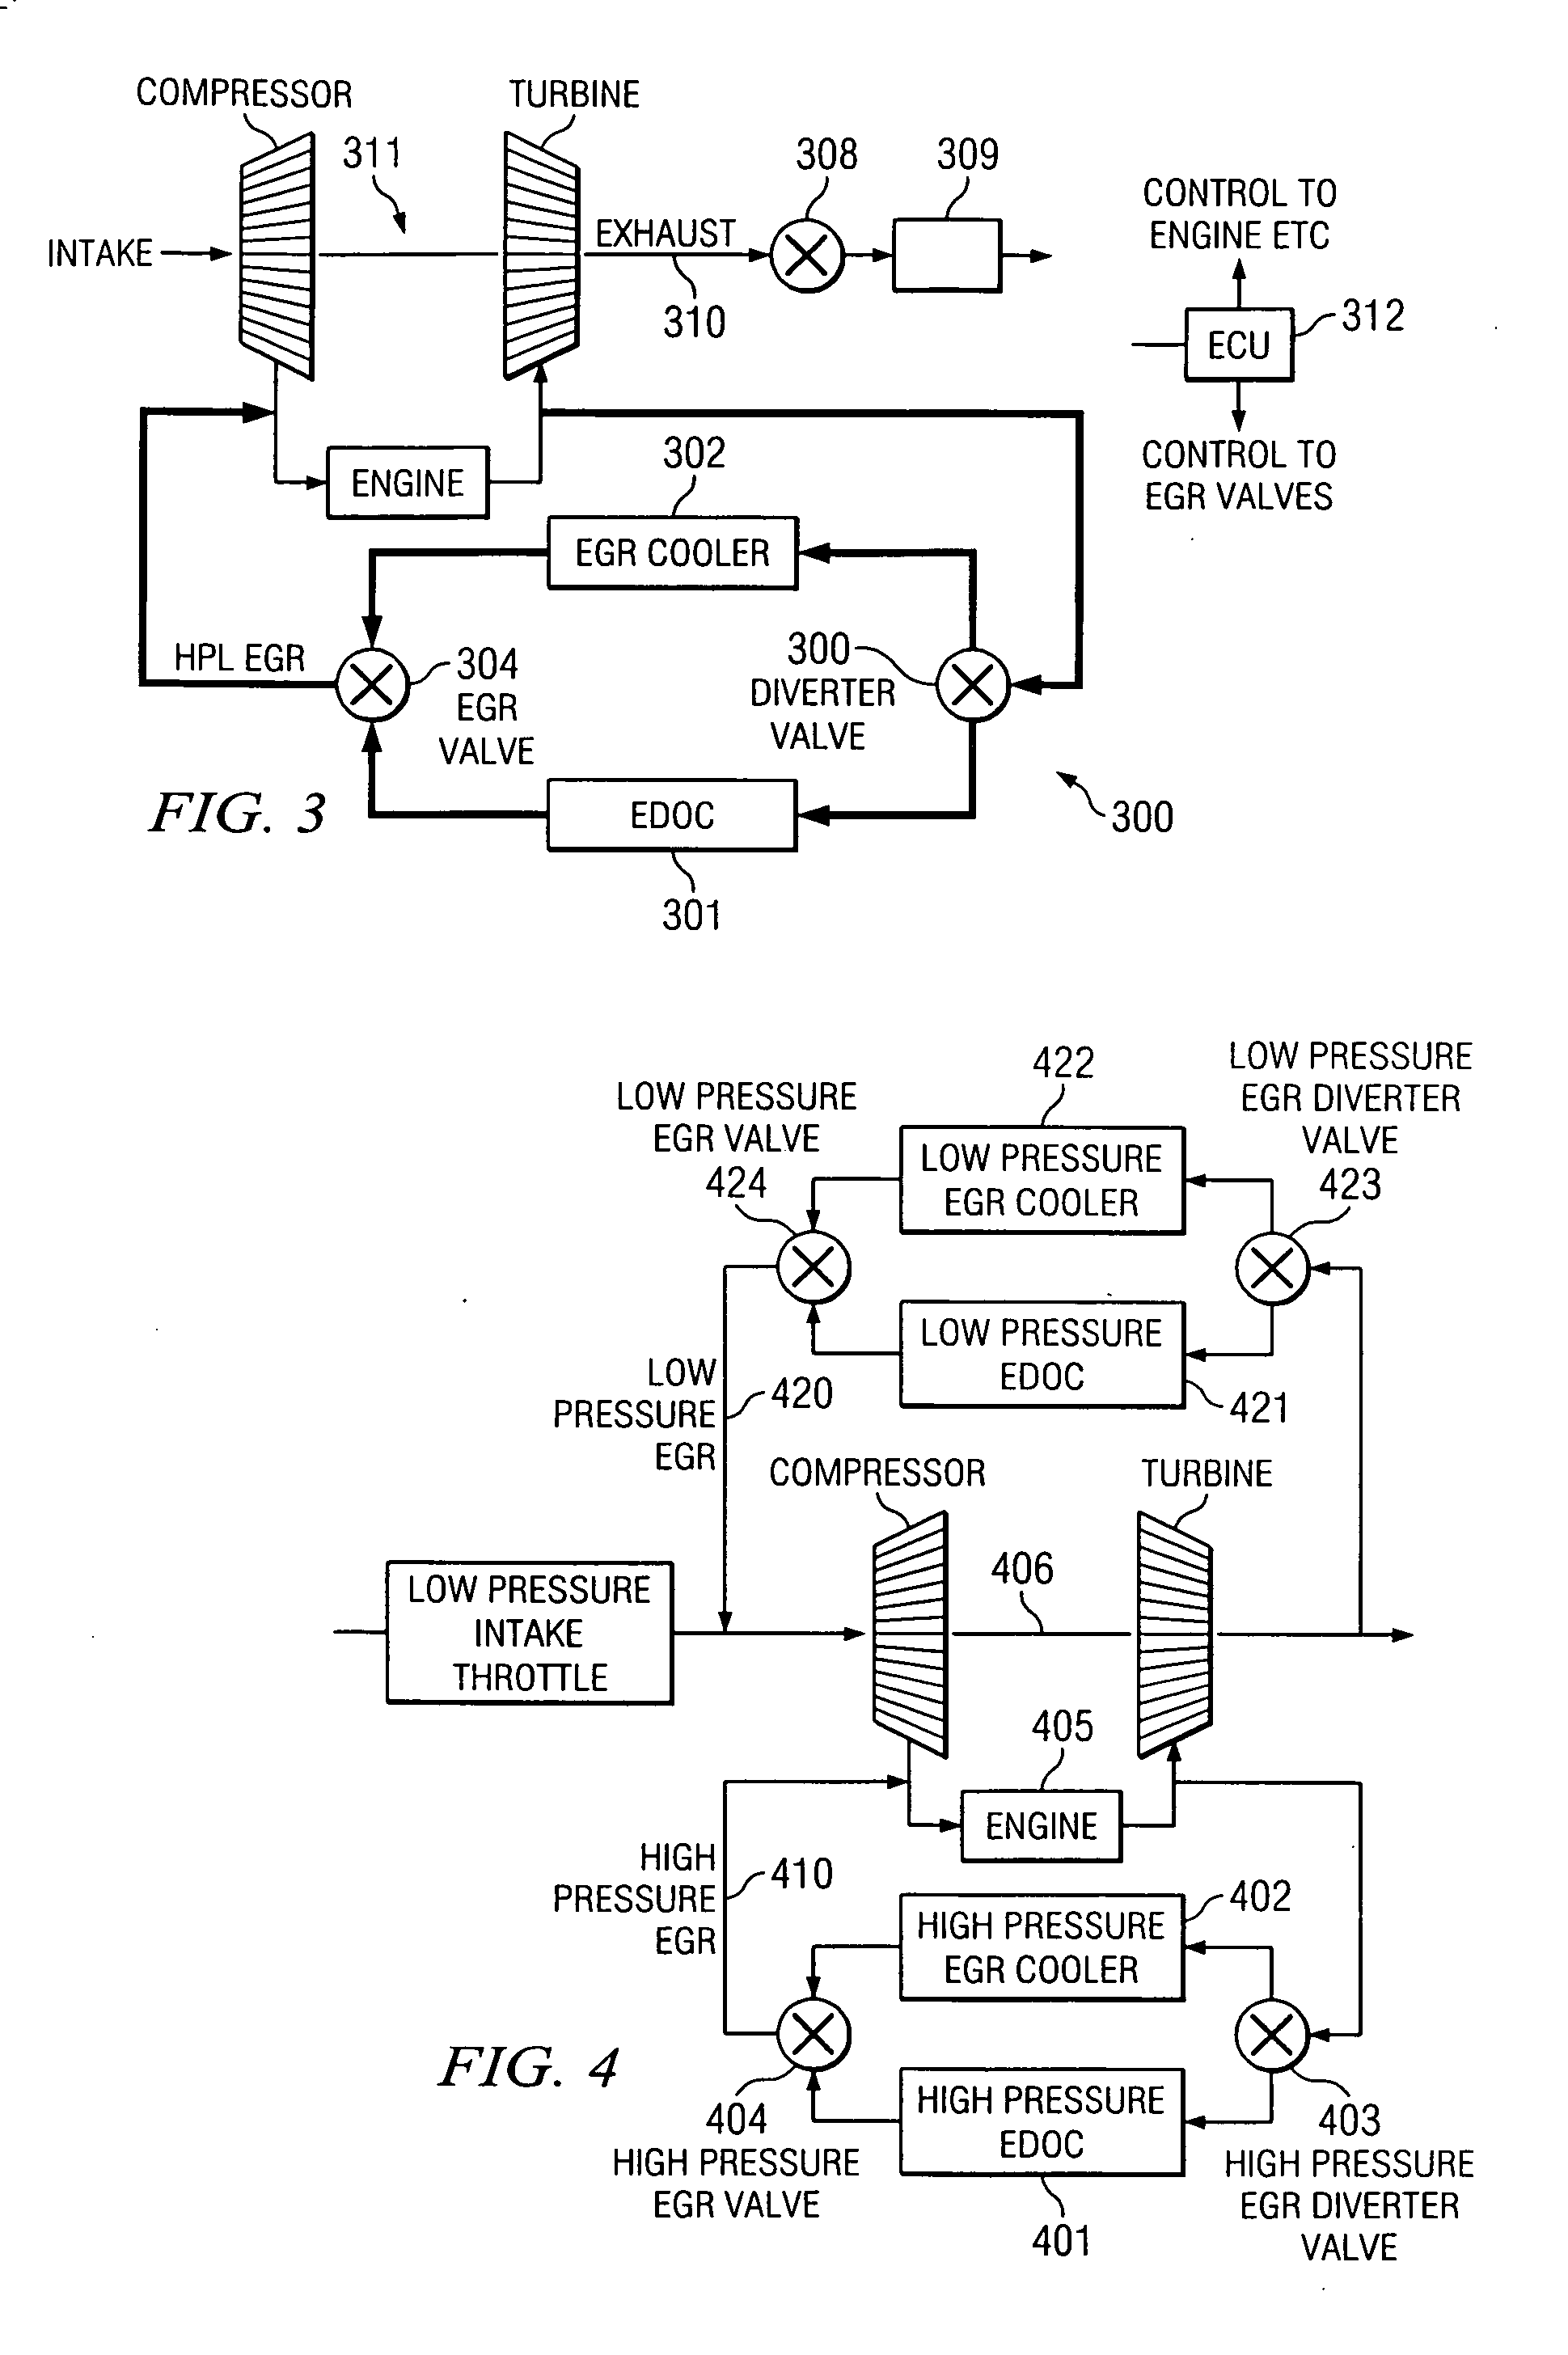 Exhaust gas recirculation system with control of EGR gas temperature